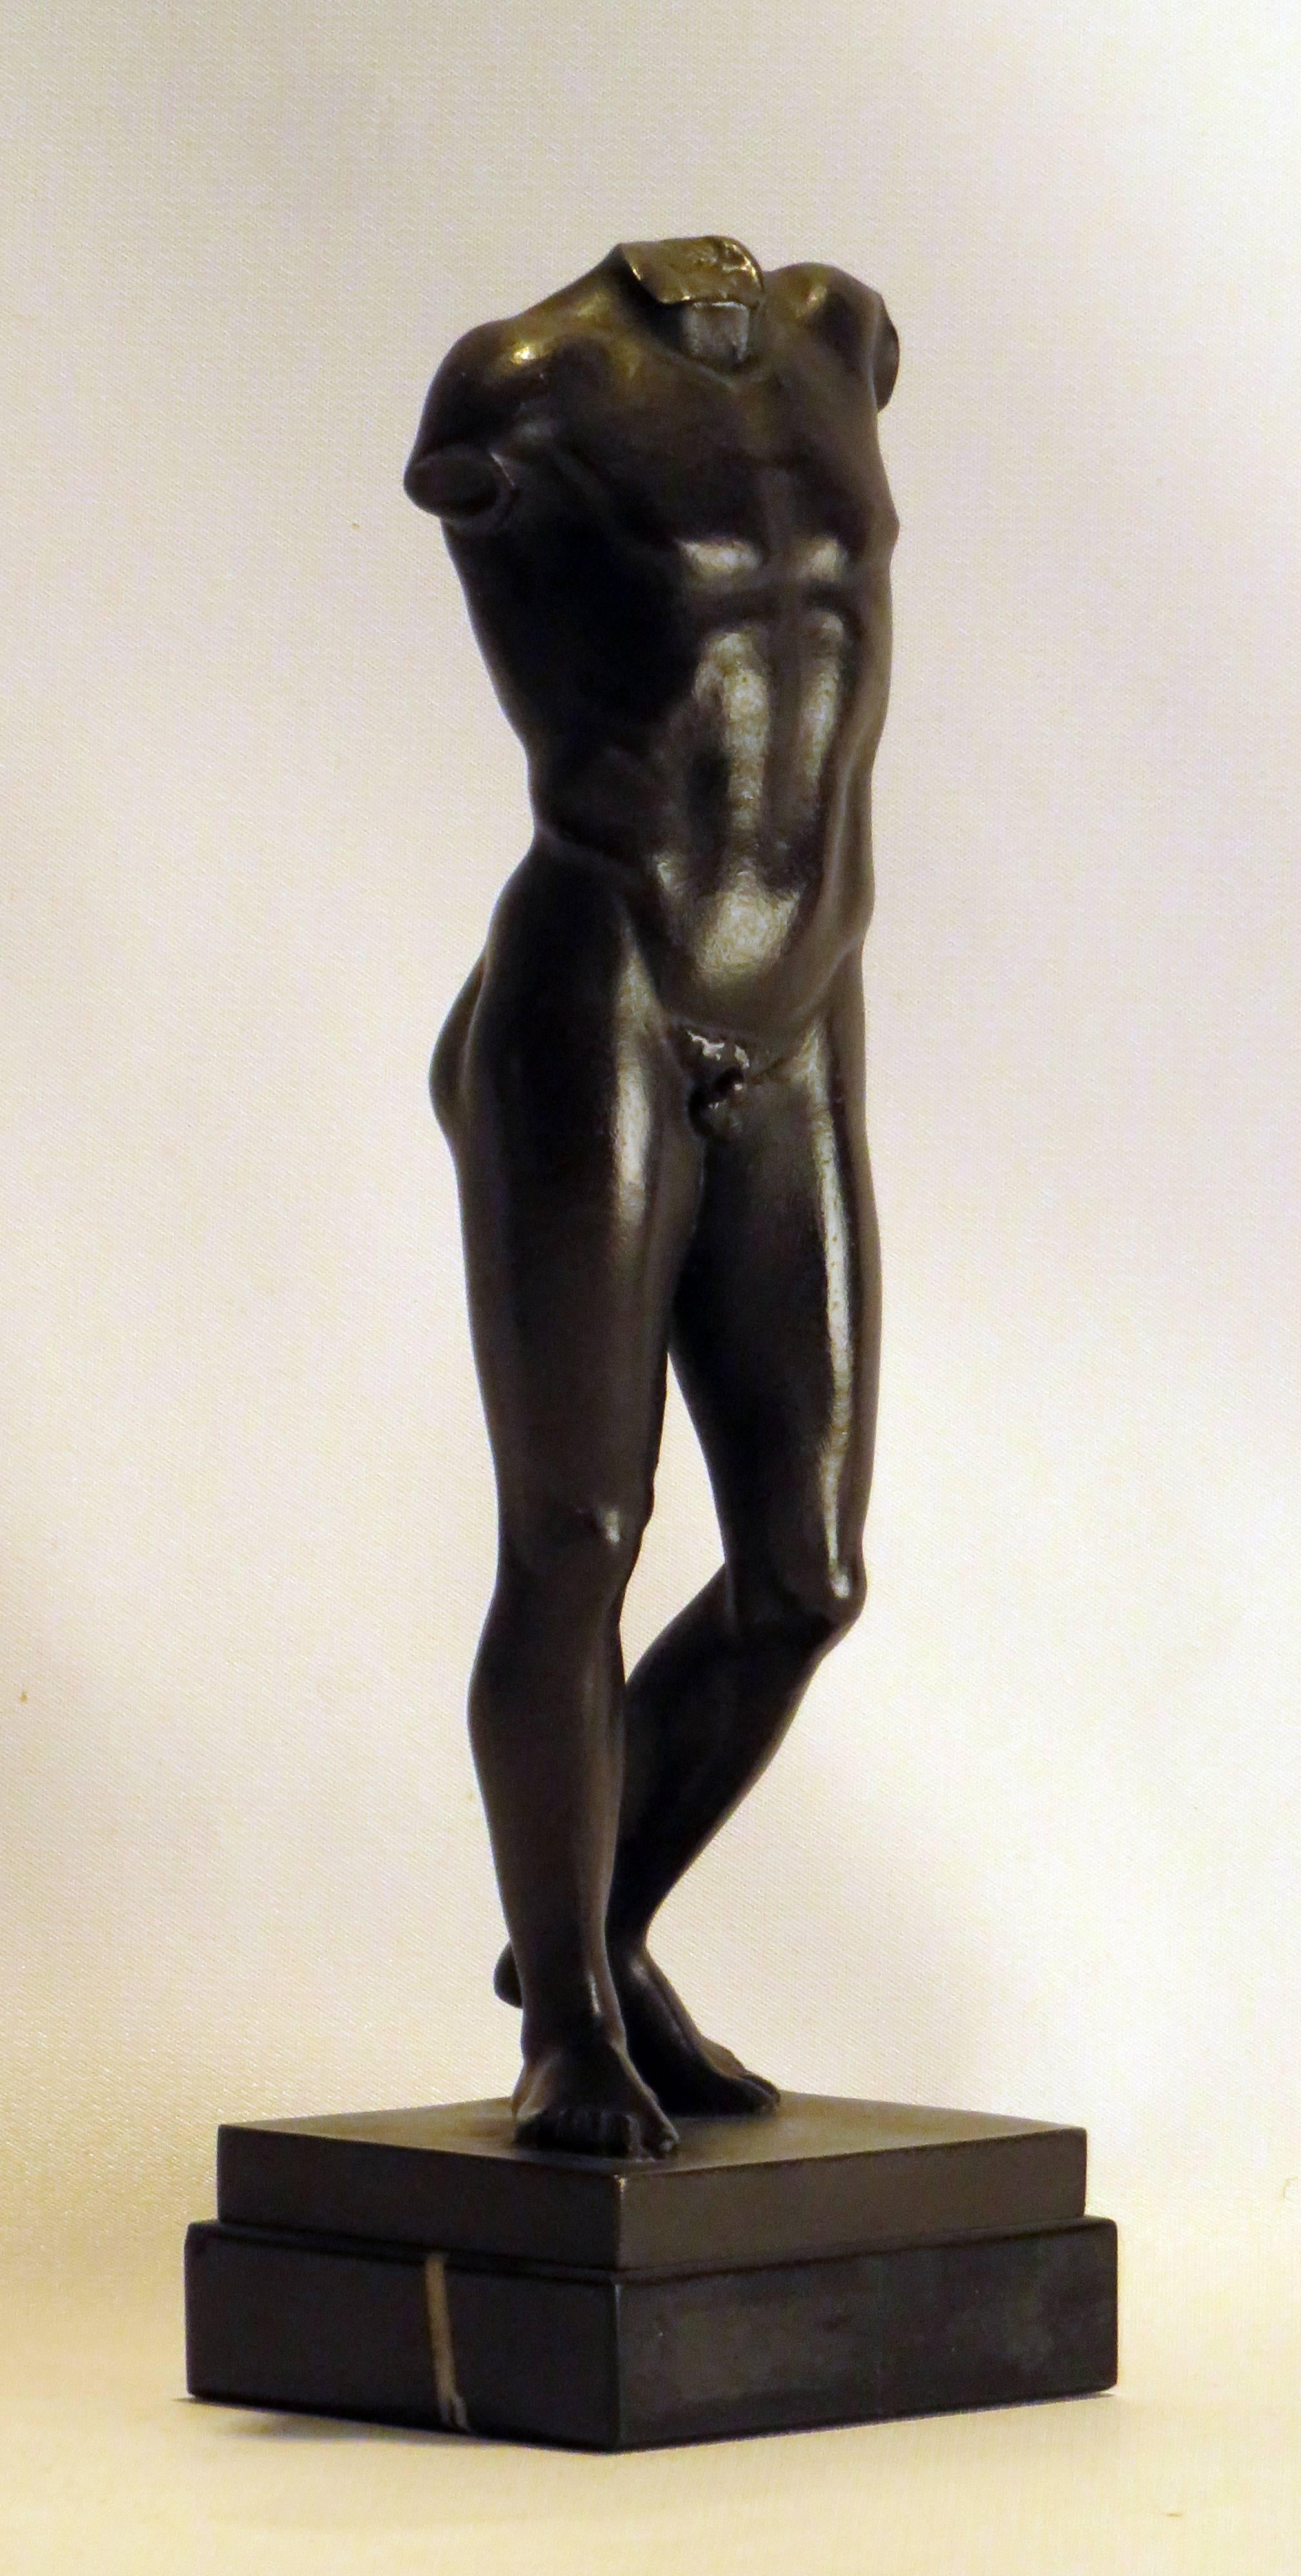 A wonderful casting in bronze of an athletic nude young man inspired by the marble originals seen so often in museums. This statue could represent a number of gods from antiquity. Mounted on black veined marble, Italy, circa 1880.